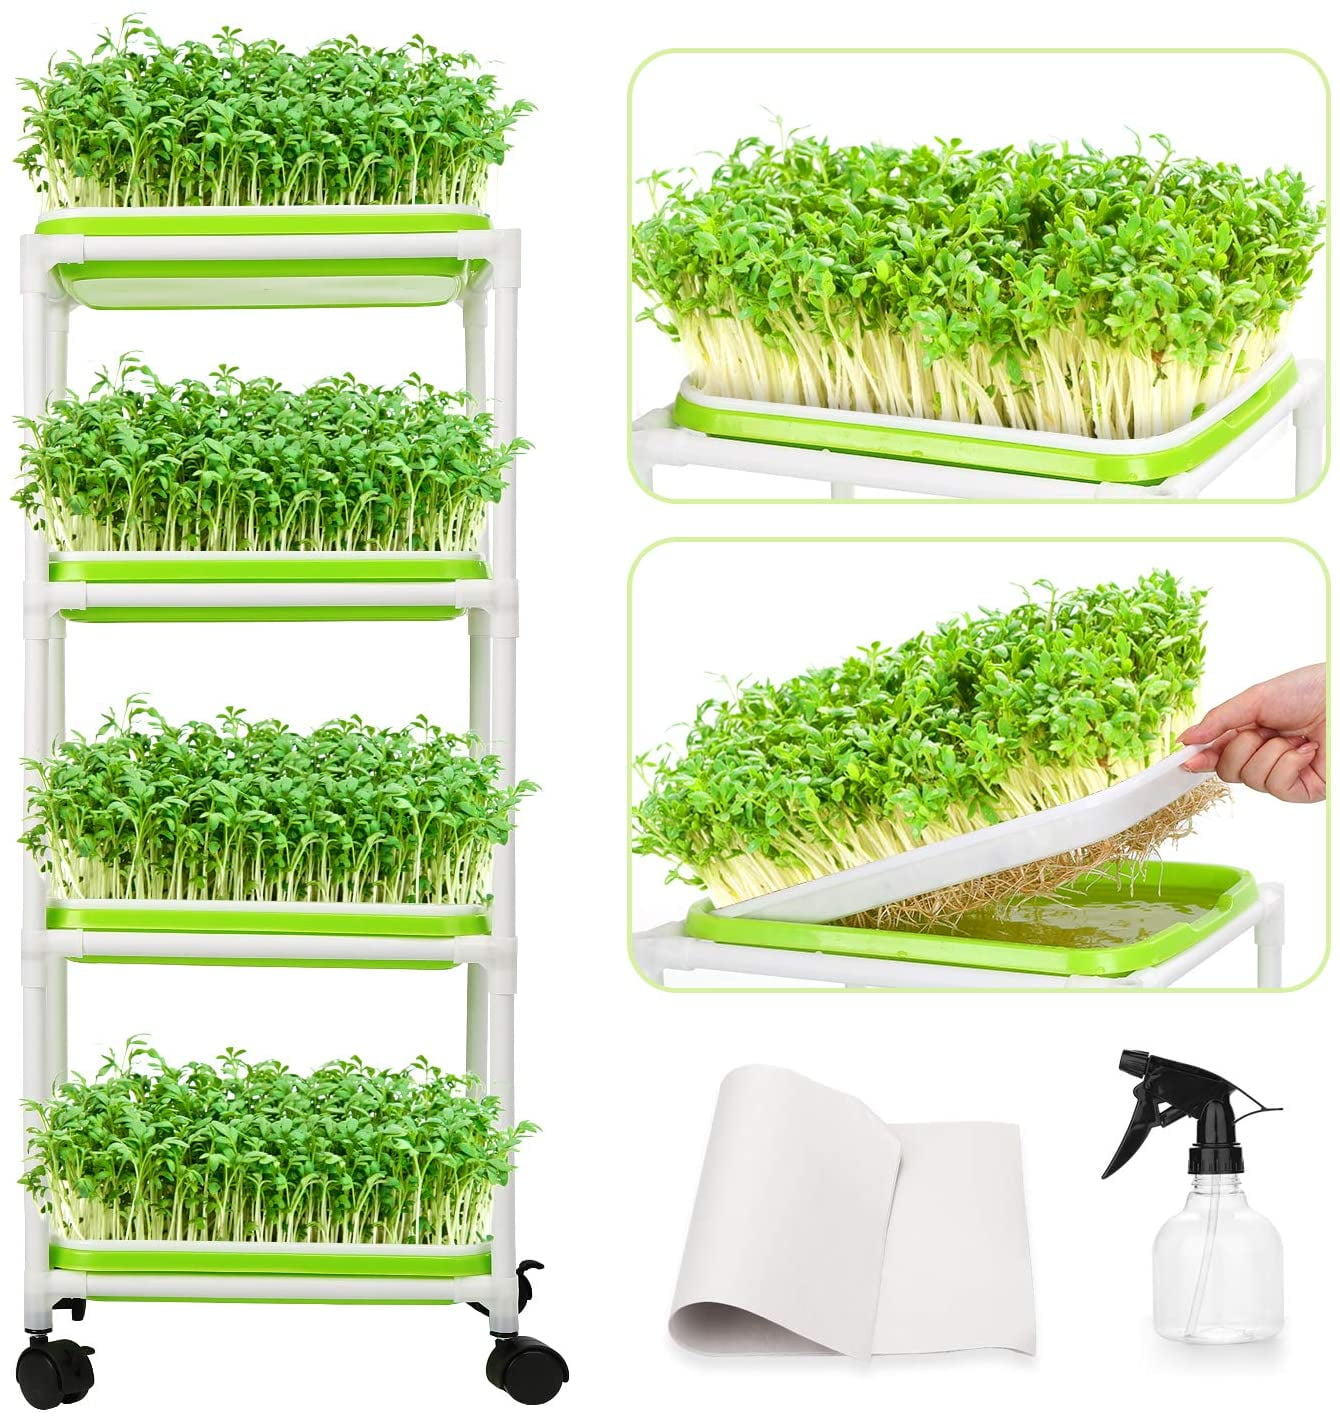 Seed Sprouter Tray Soil-Free Big Capacity Germination Grow Box Grass best W3L5 